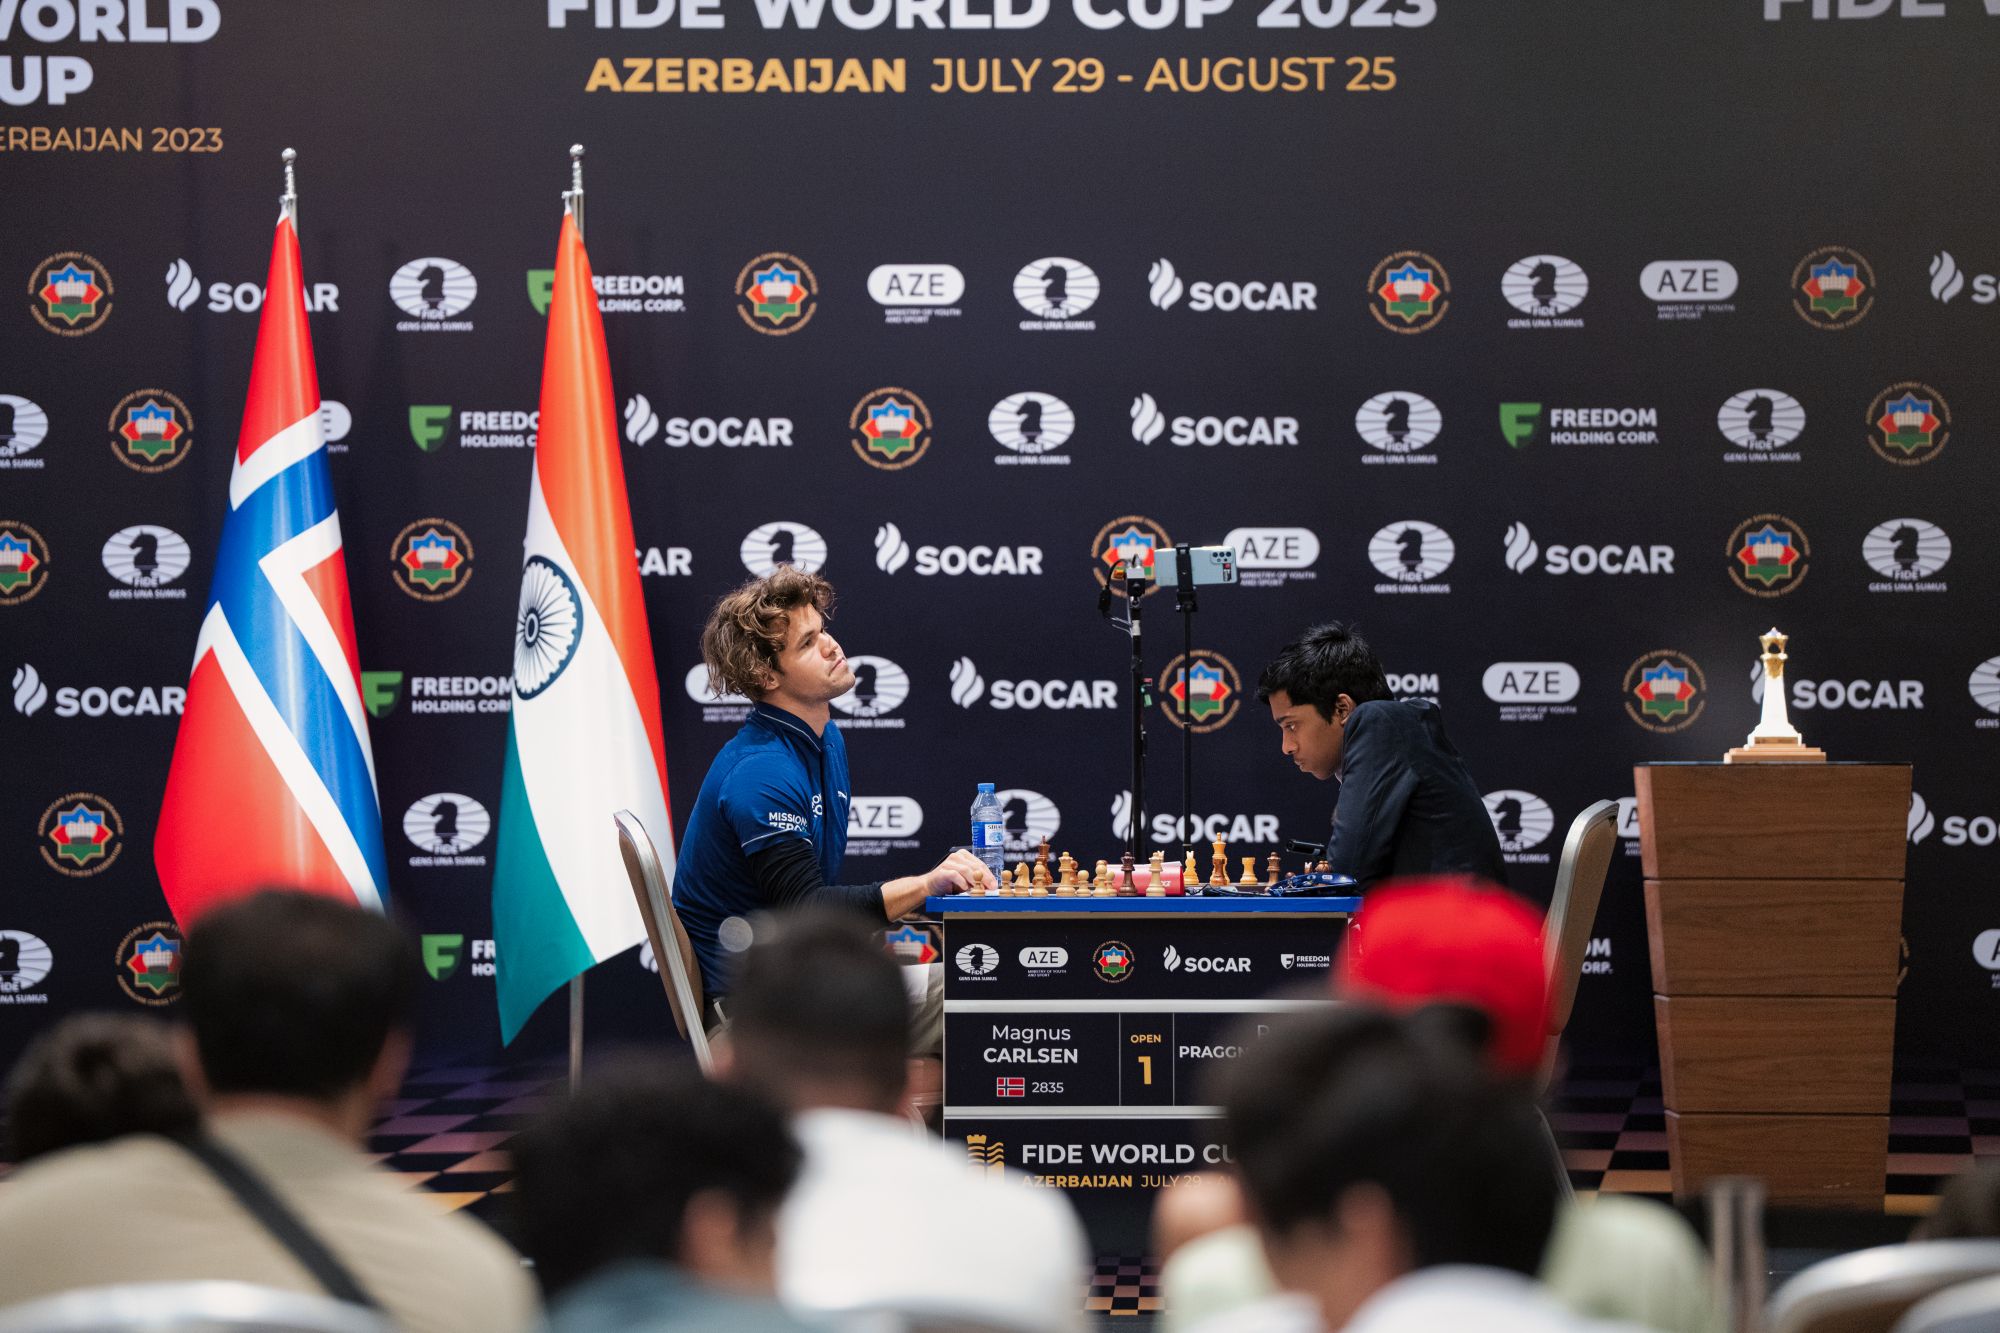 FIDE World Chess Cup (Round 7.2.): Carlsen Books Spot In Final